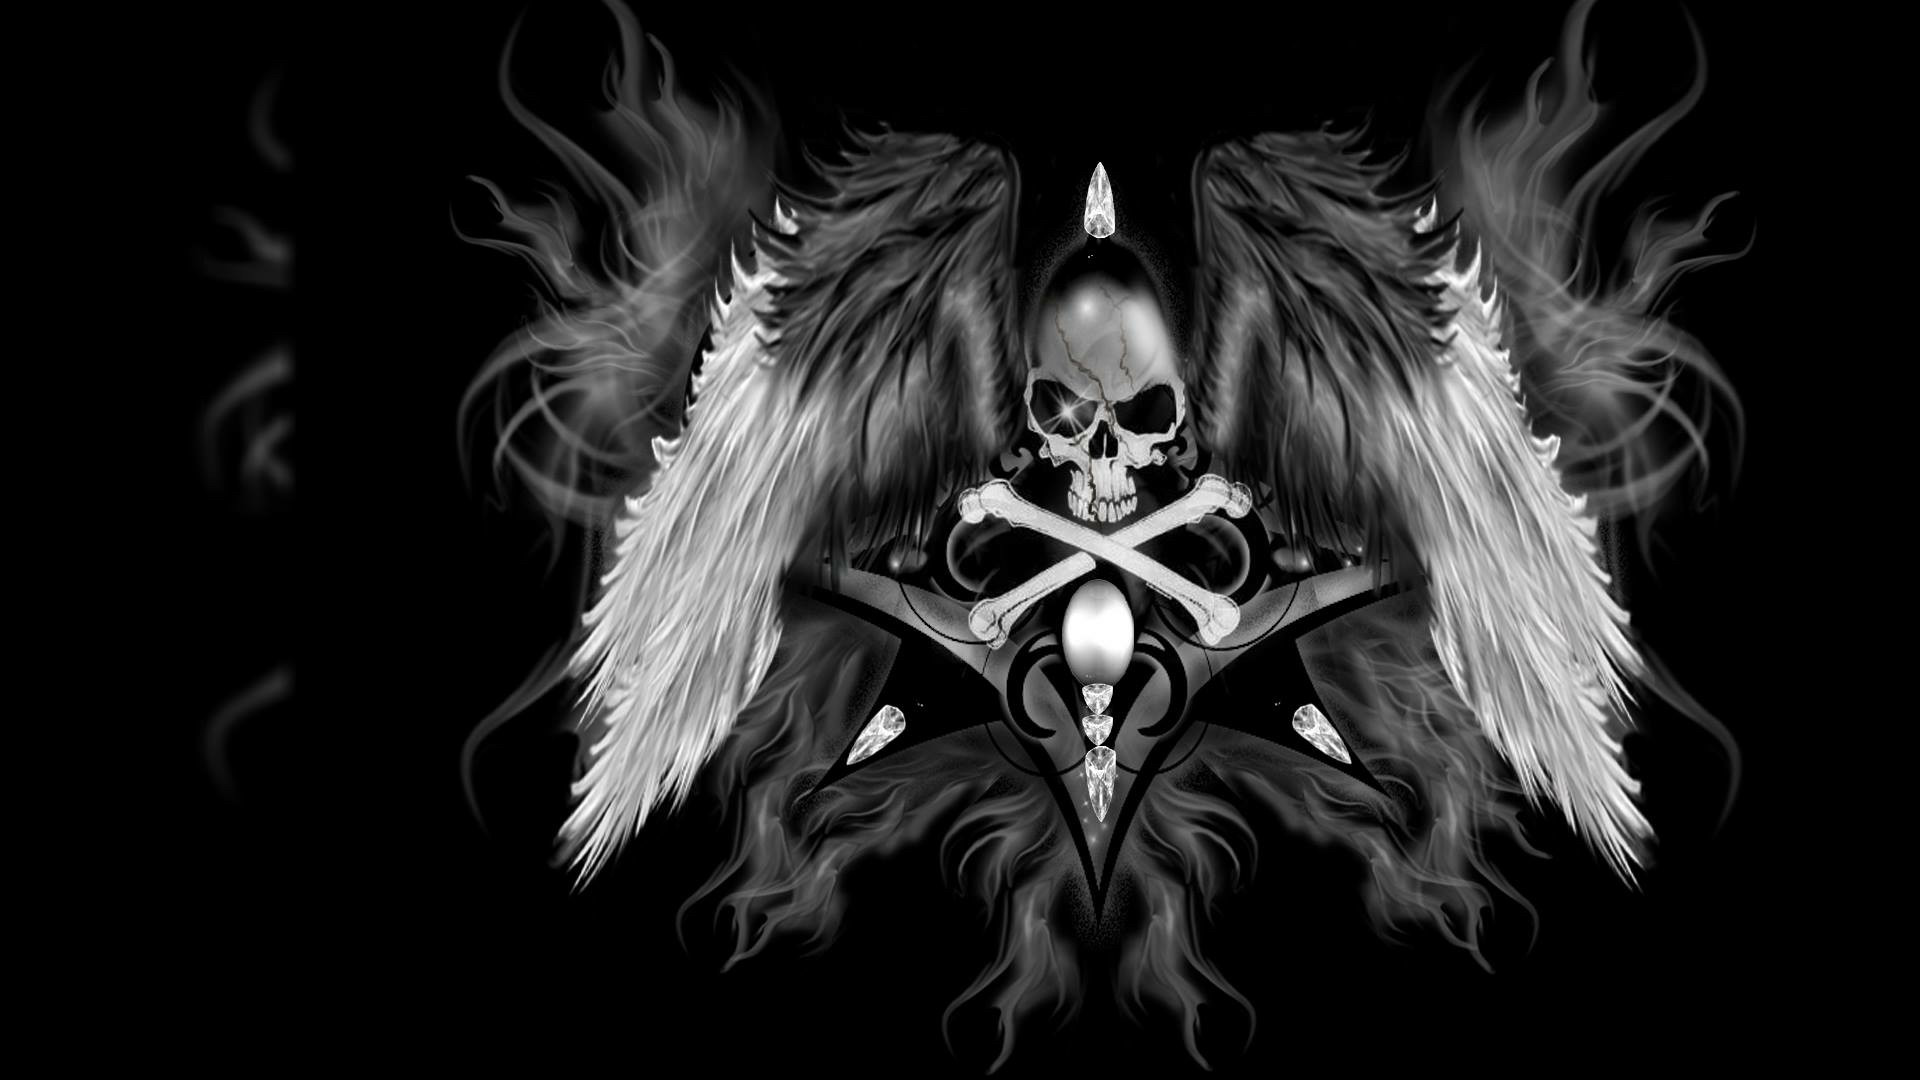 1920x1080 Explore Hd Skull Wallpapers, Wallpapers Android, and more!